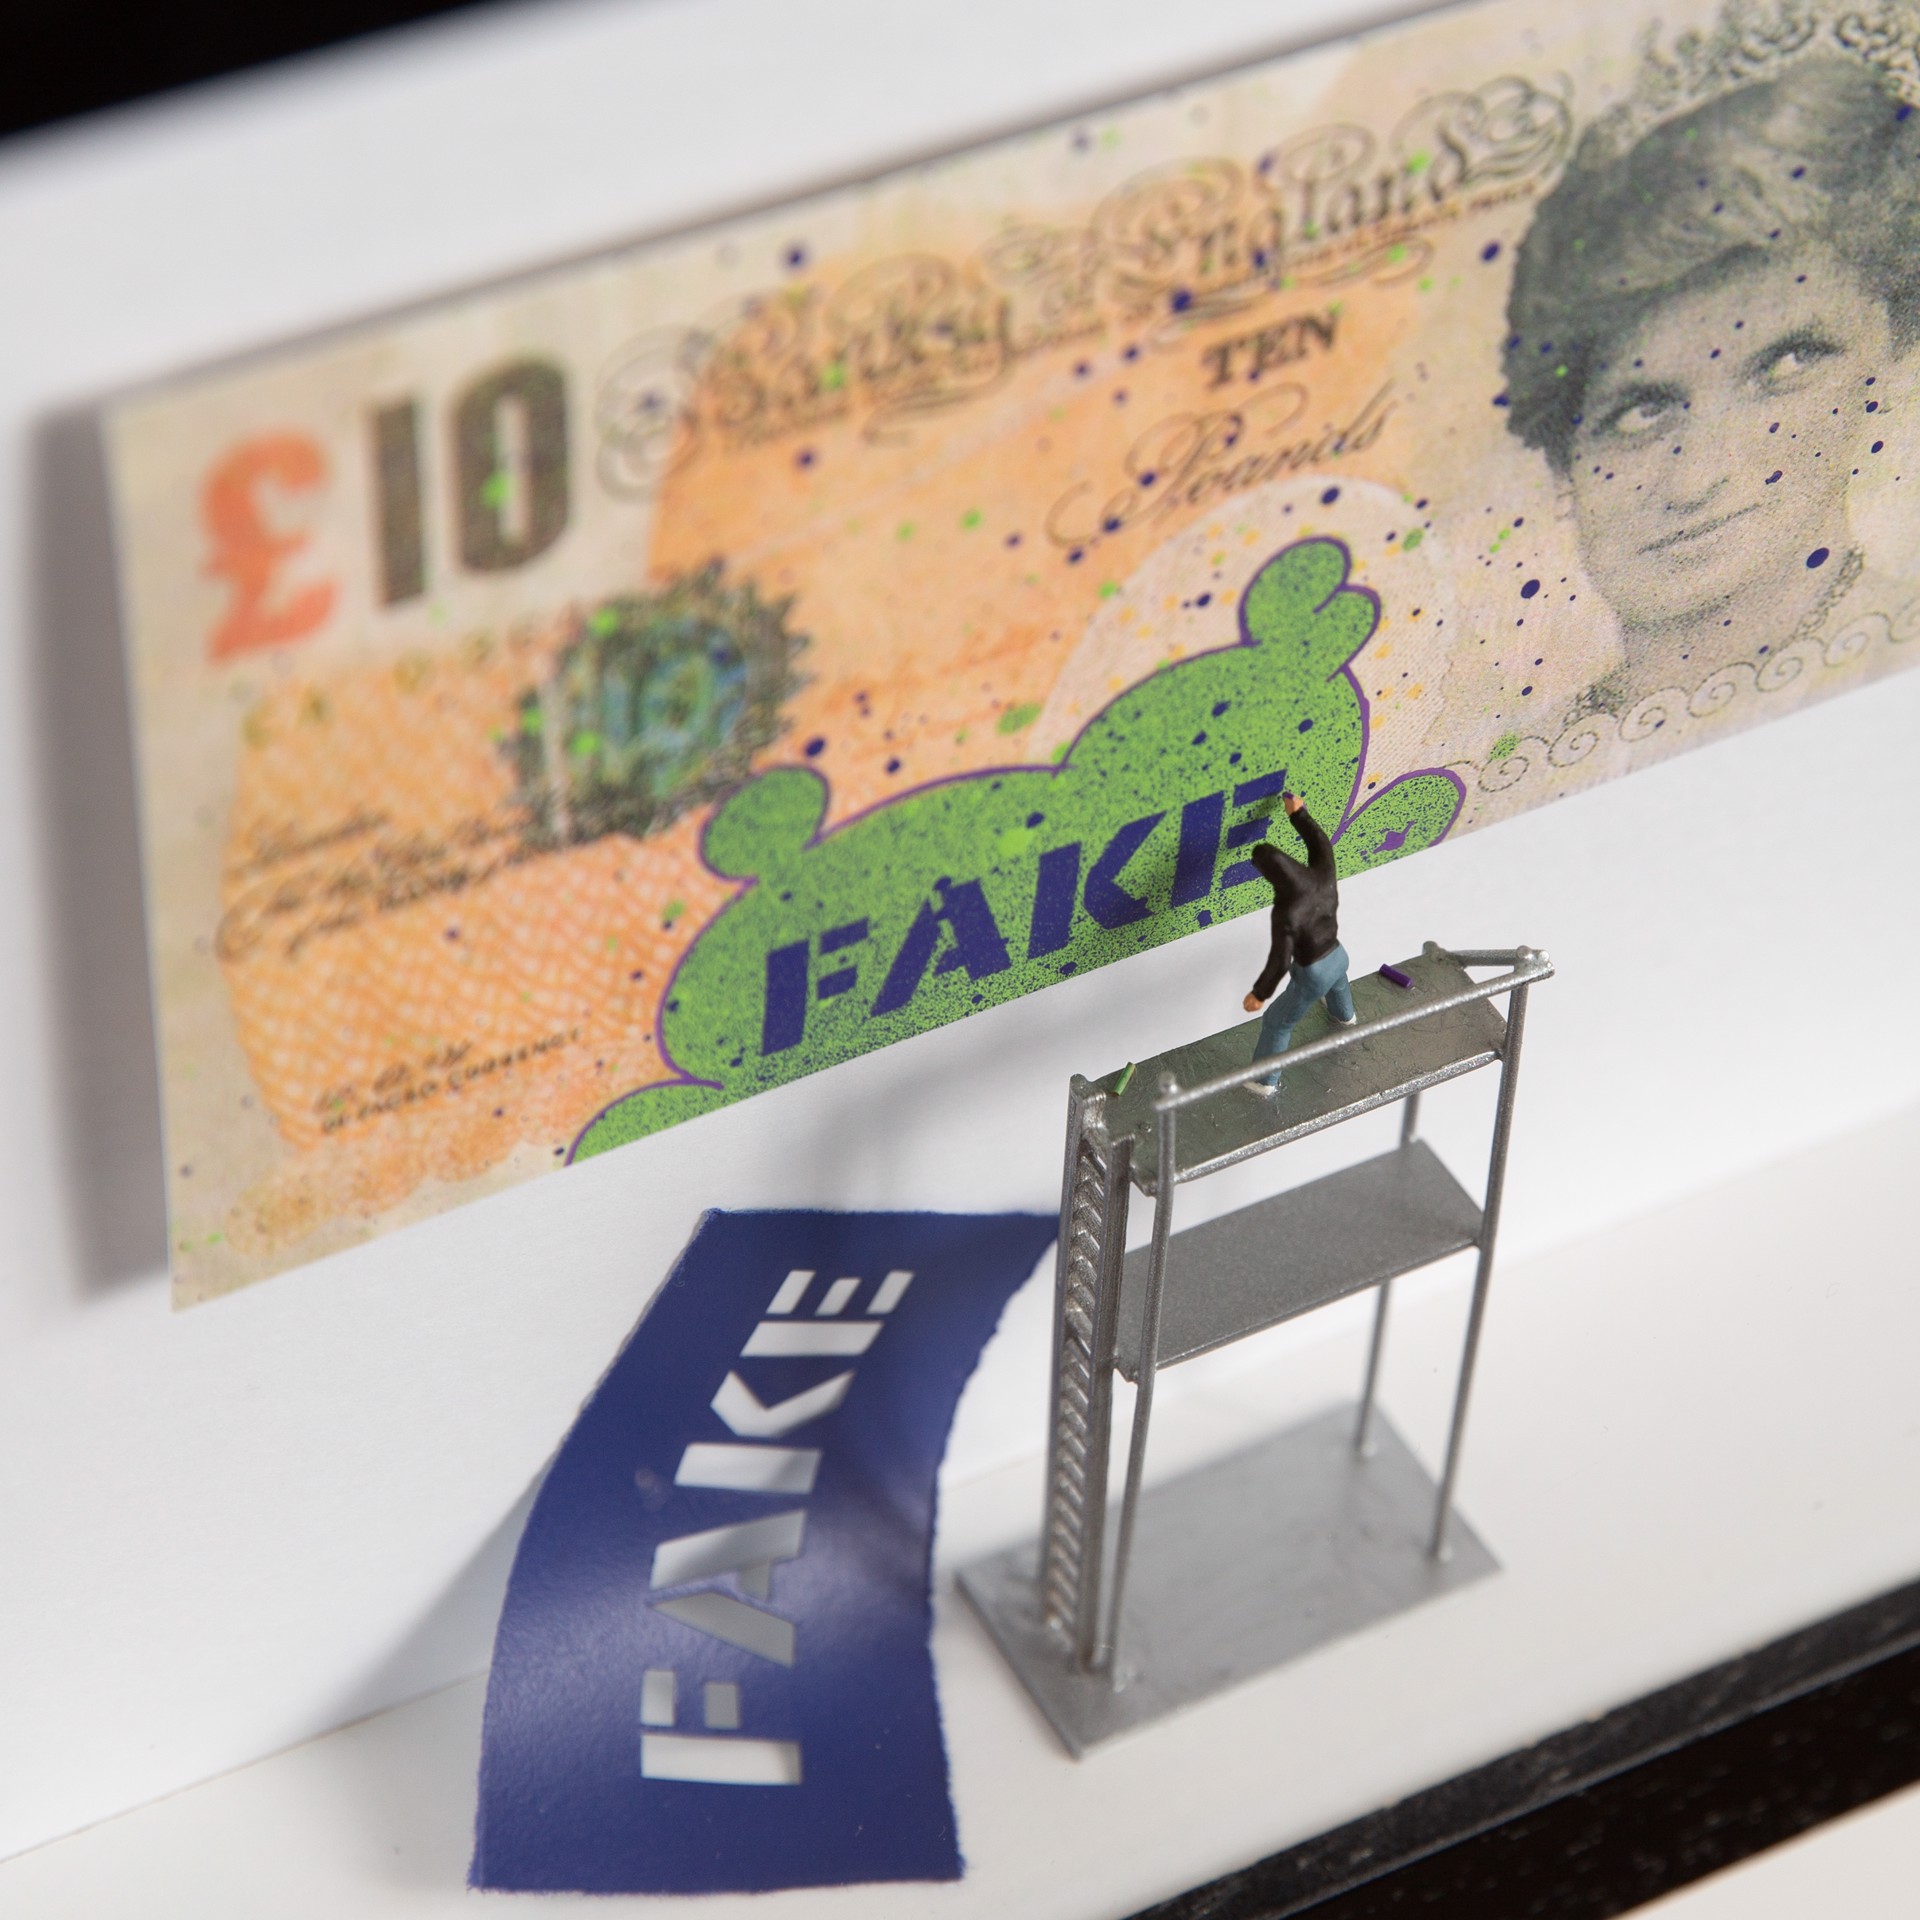 Di-Faked Tenner Blue/Green by Roy's People